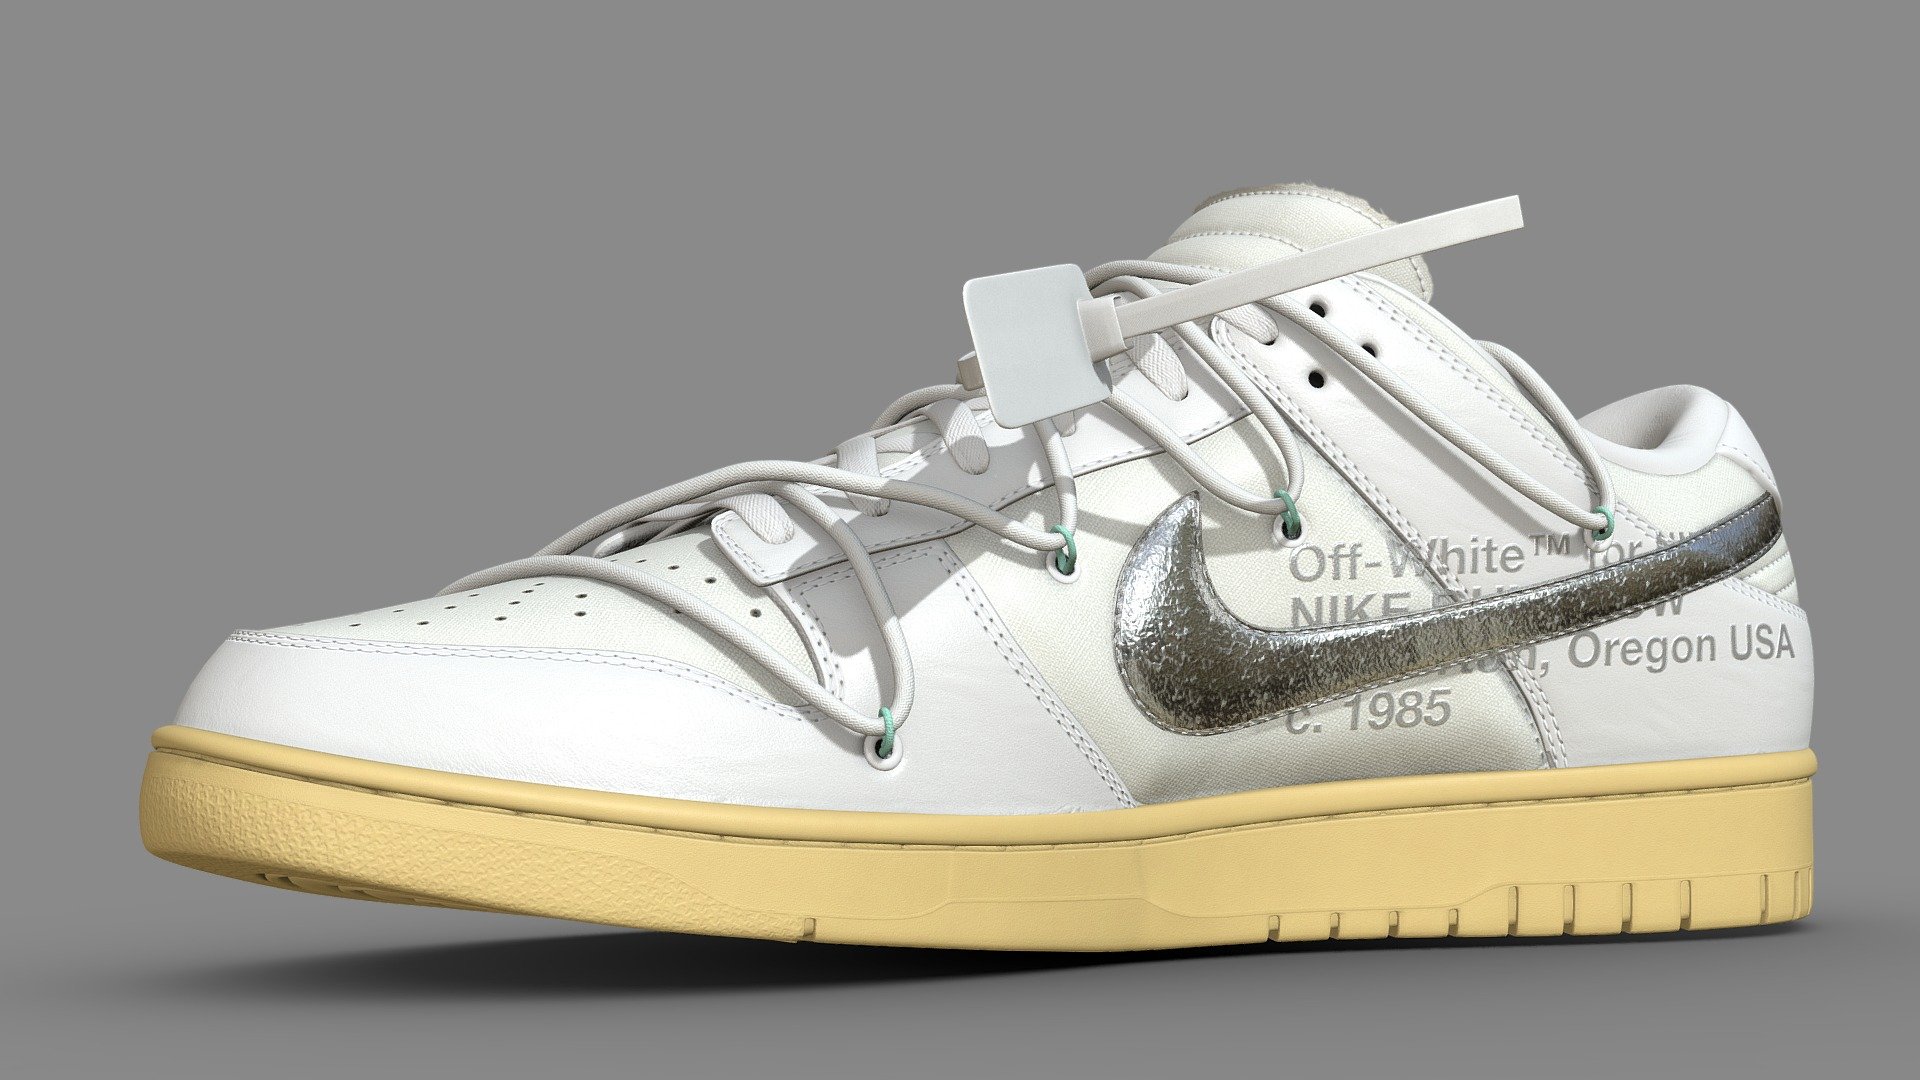 Off White collaboration with Nike on a Dunk Low, made in Blender, textured in Substance. Panels of white leather complement slightly off white canvas with a metallic swoosh and aged midsole.

Every detail was made in the recreation of this shoe, from the text on the medial side of the shoe to the subtlety of each material, nothing went overlooked. Stitches were sculpted by hand to achieve the highest quality, and the frayed edge on the tongue of the shoe was created such that there would be no gap between the canvas fabric and foam

What's included Firstly, two versions of this model. The base version with 4 texture sets, and a One Mesh version that uses only 1 texture set. Both models are identical, only how they are unwrapped is different. There are two texture sets, with 4 maps, namely: Base Color, Metallic, Normal, and Roughness. I have included several other versions, such as High and Low Poly shoes All textures are 4096x4096. Meaning the One Mesh version has 4 2048x2048 textures 3d model